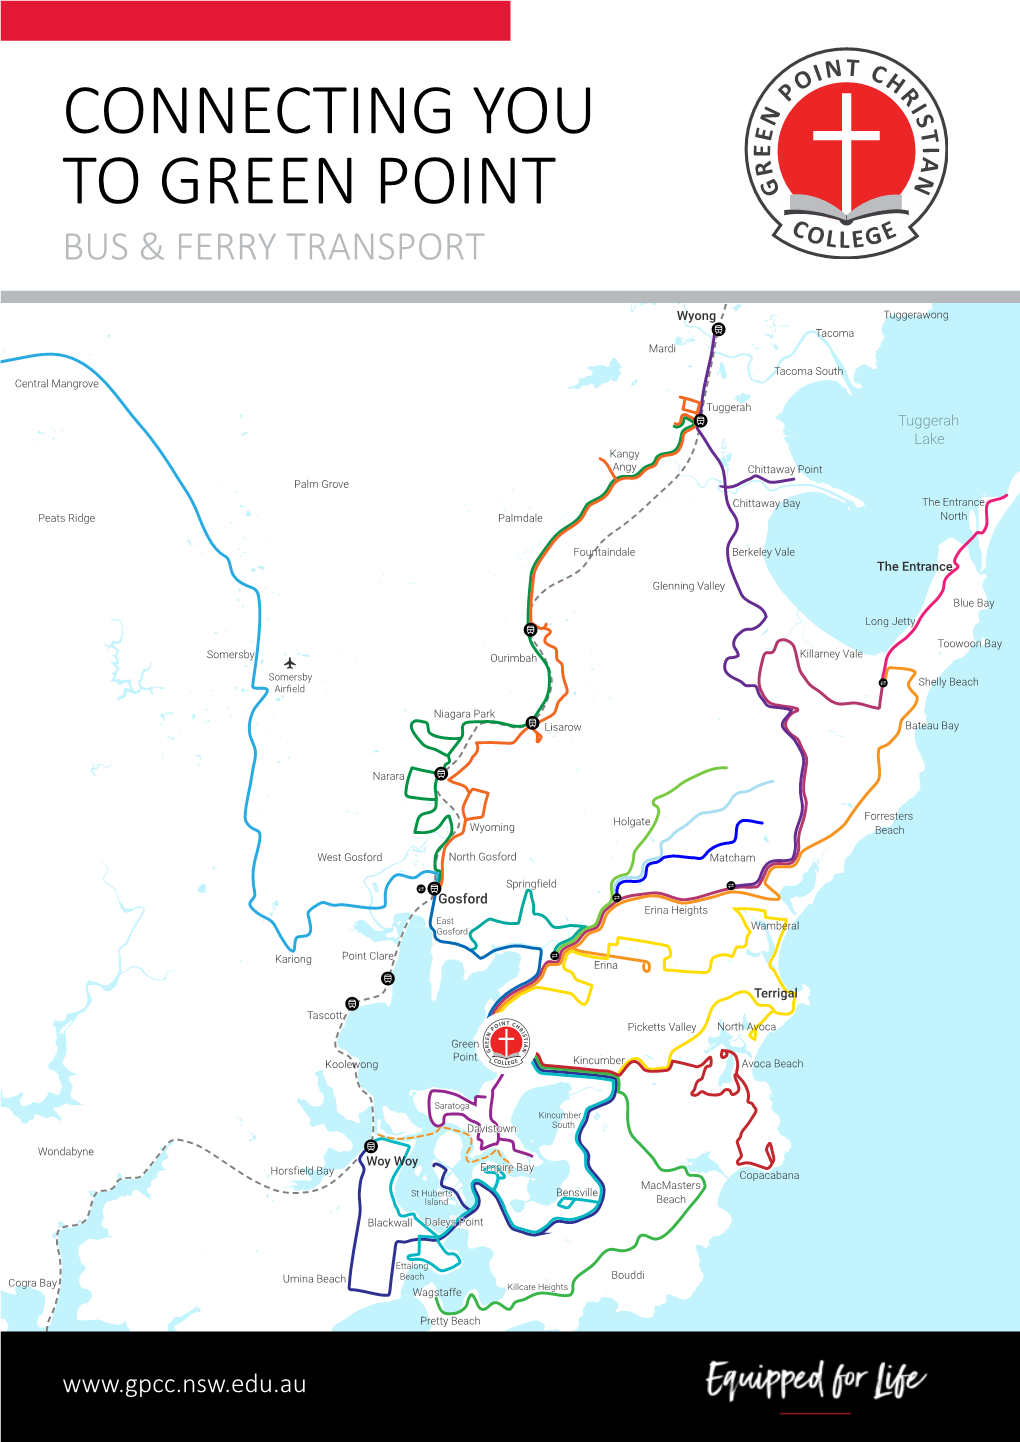 Connecting You to Green Point Bus & Ferry Transport